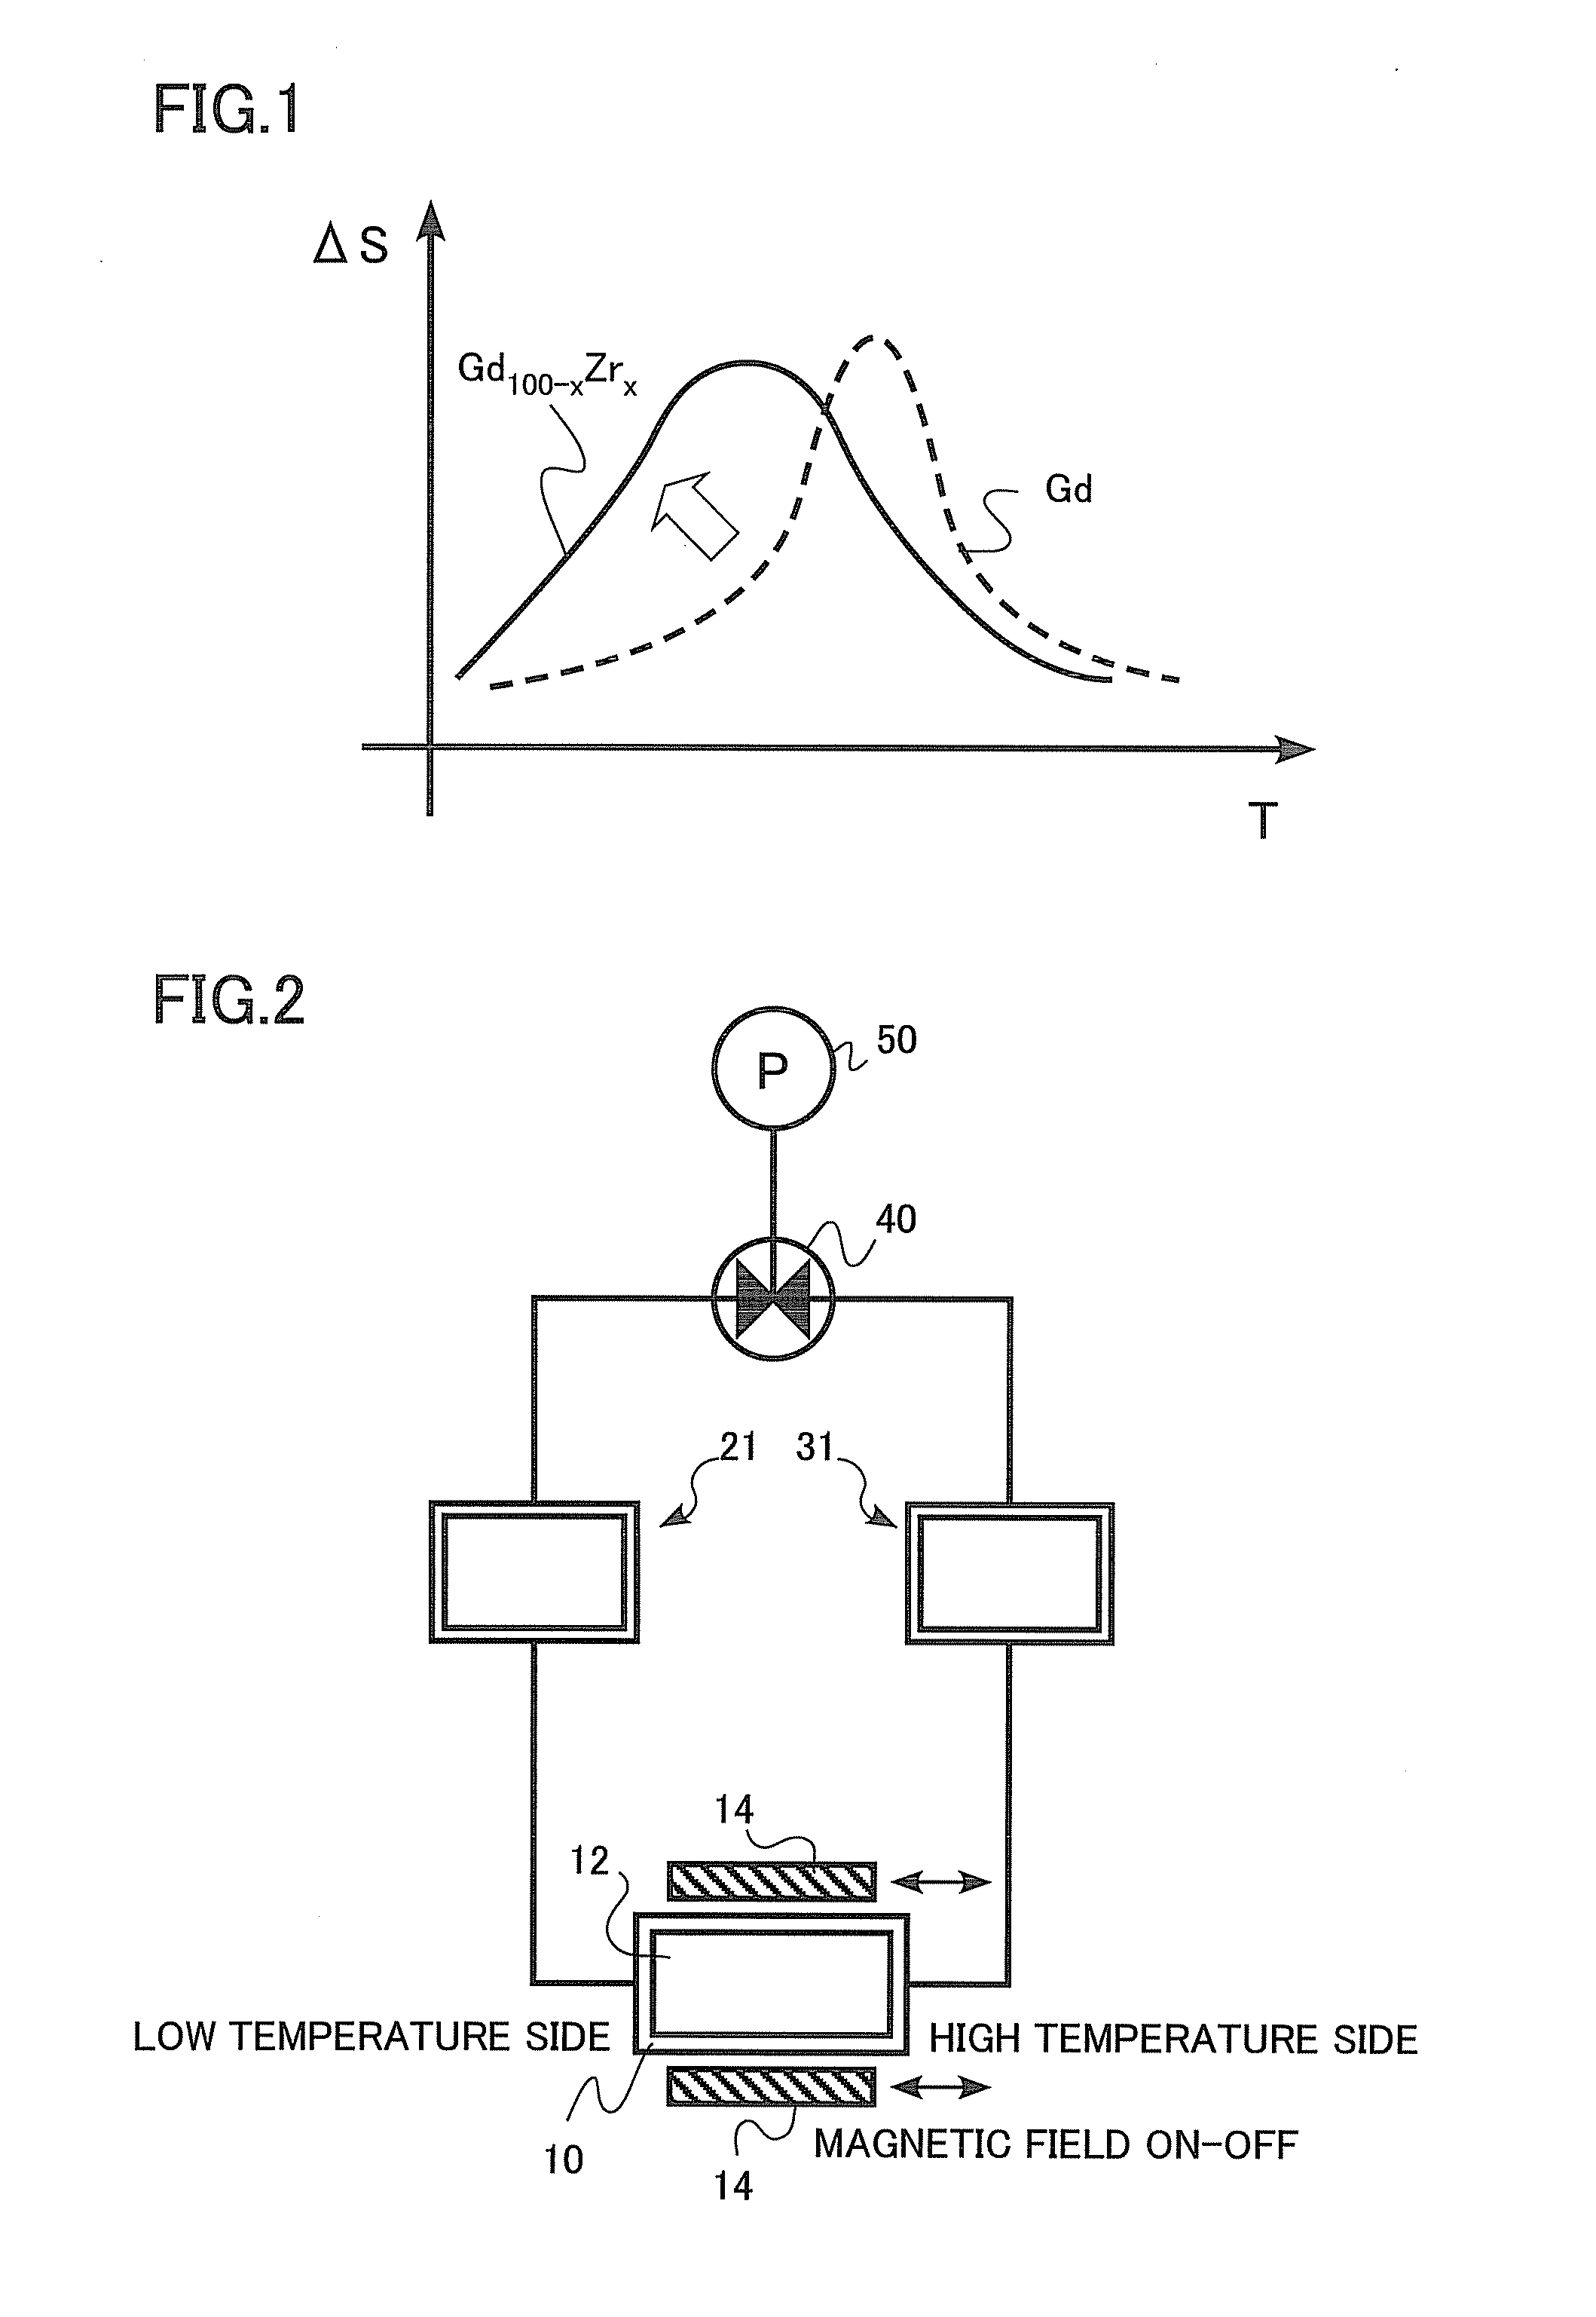 Magnetically refrigerating magnetic material, magnetic refrigeration apparatus, and magnetic refrigeration system